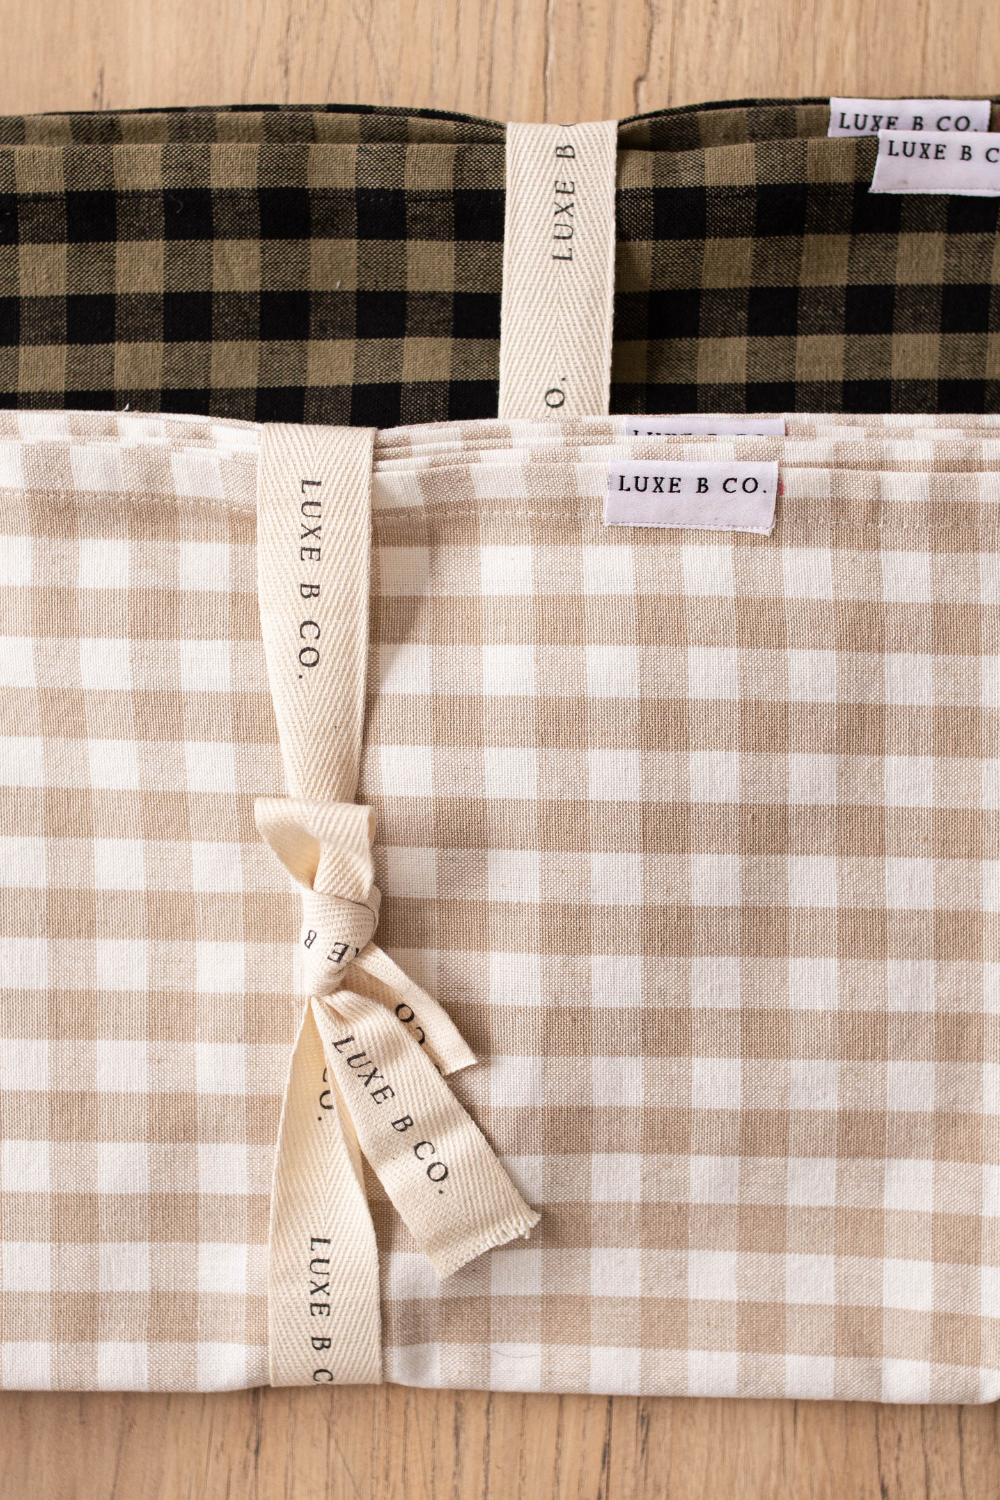 Olive Green Gingham Kitchen Dish Towel - Luxe B Co